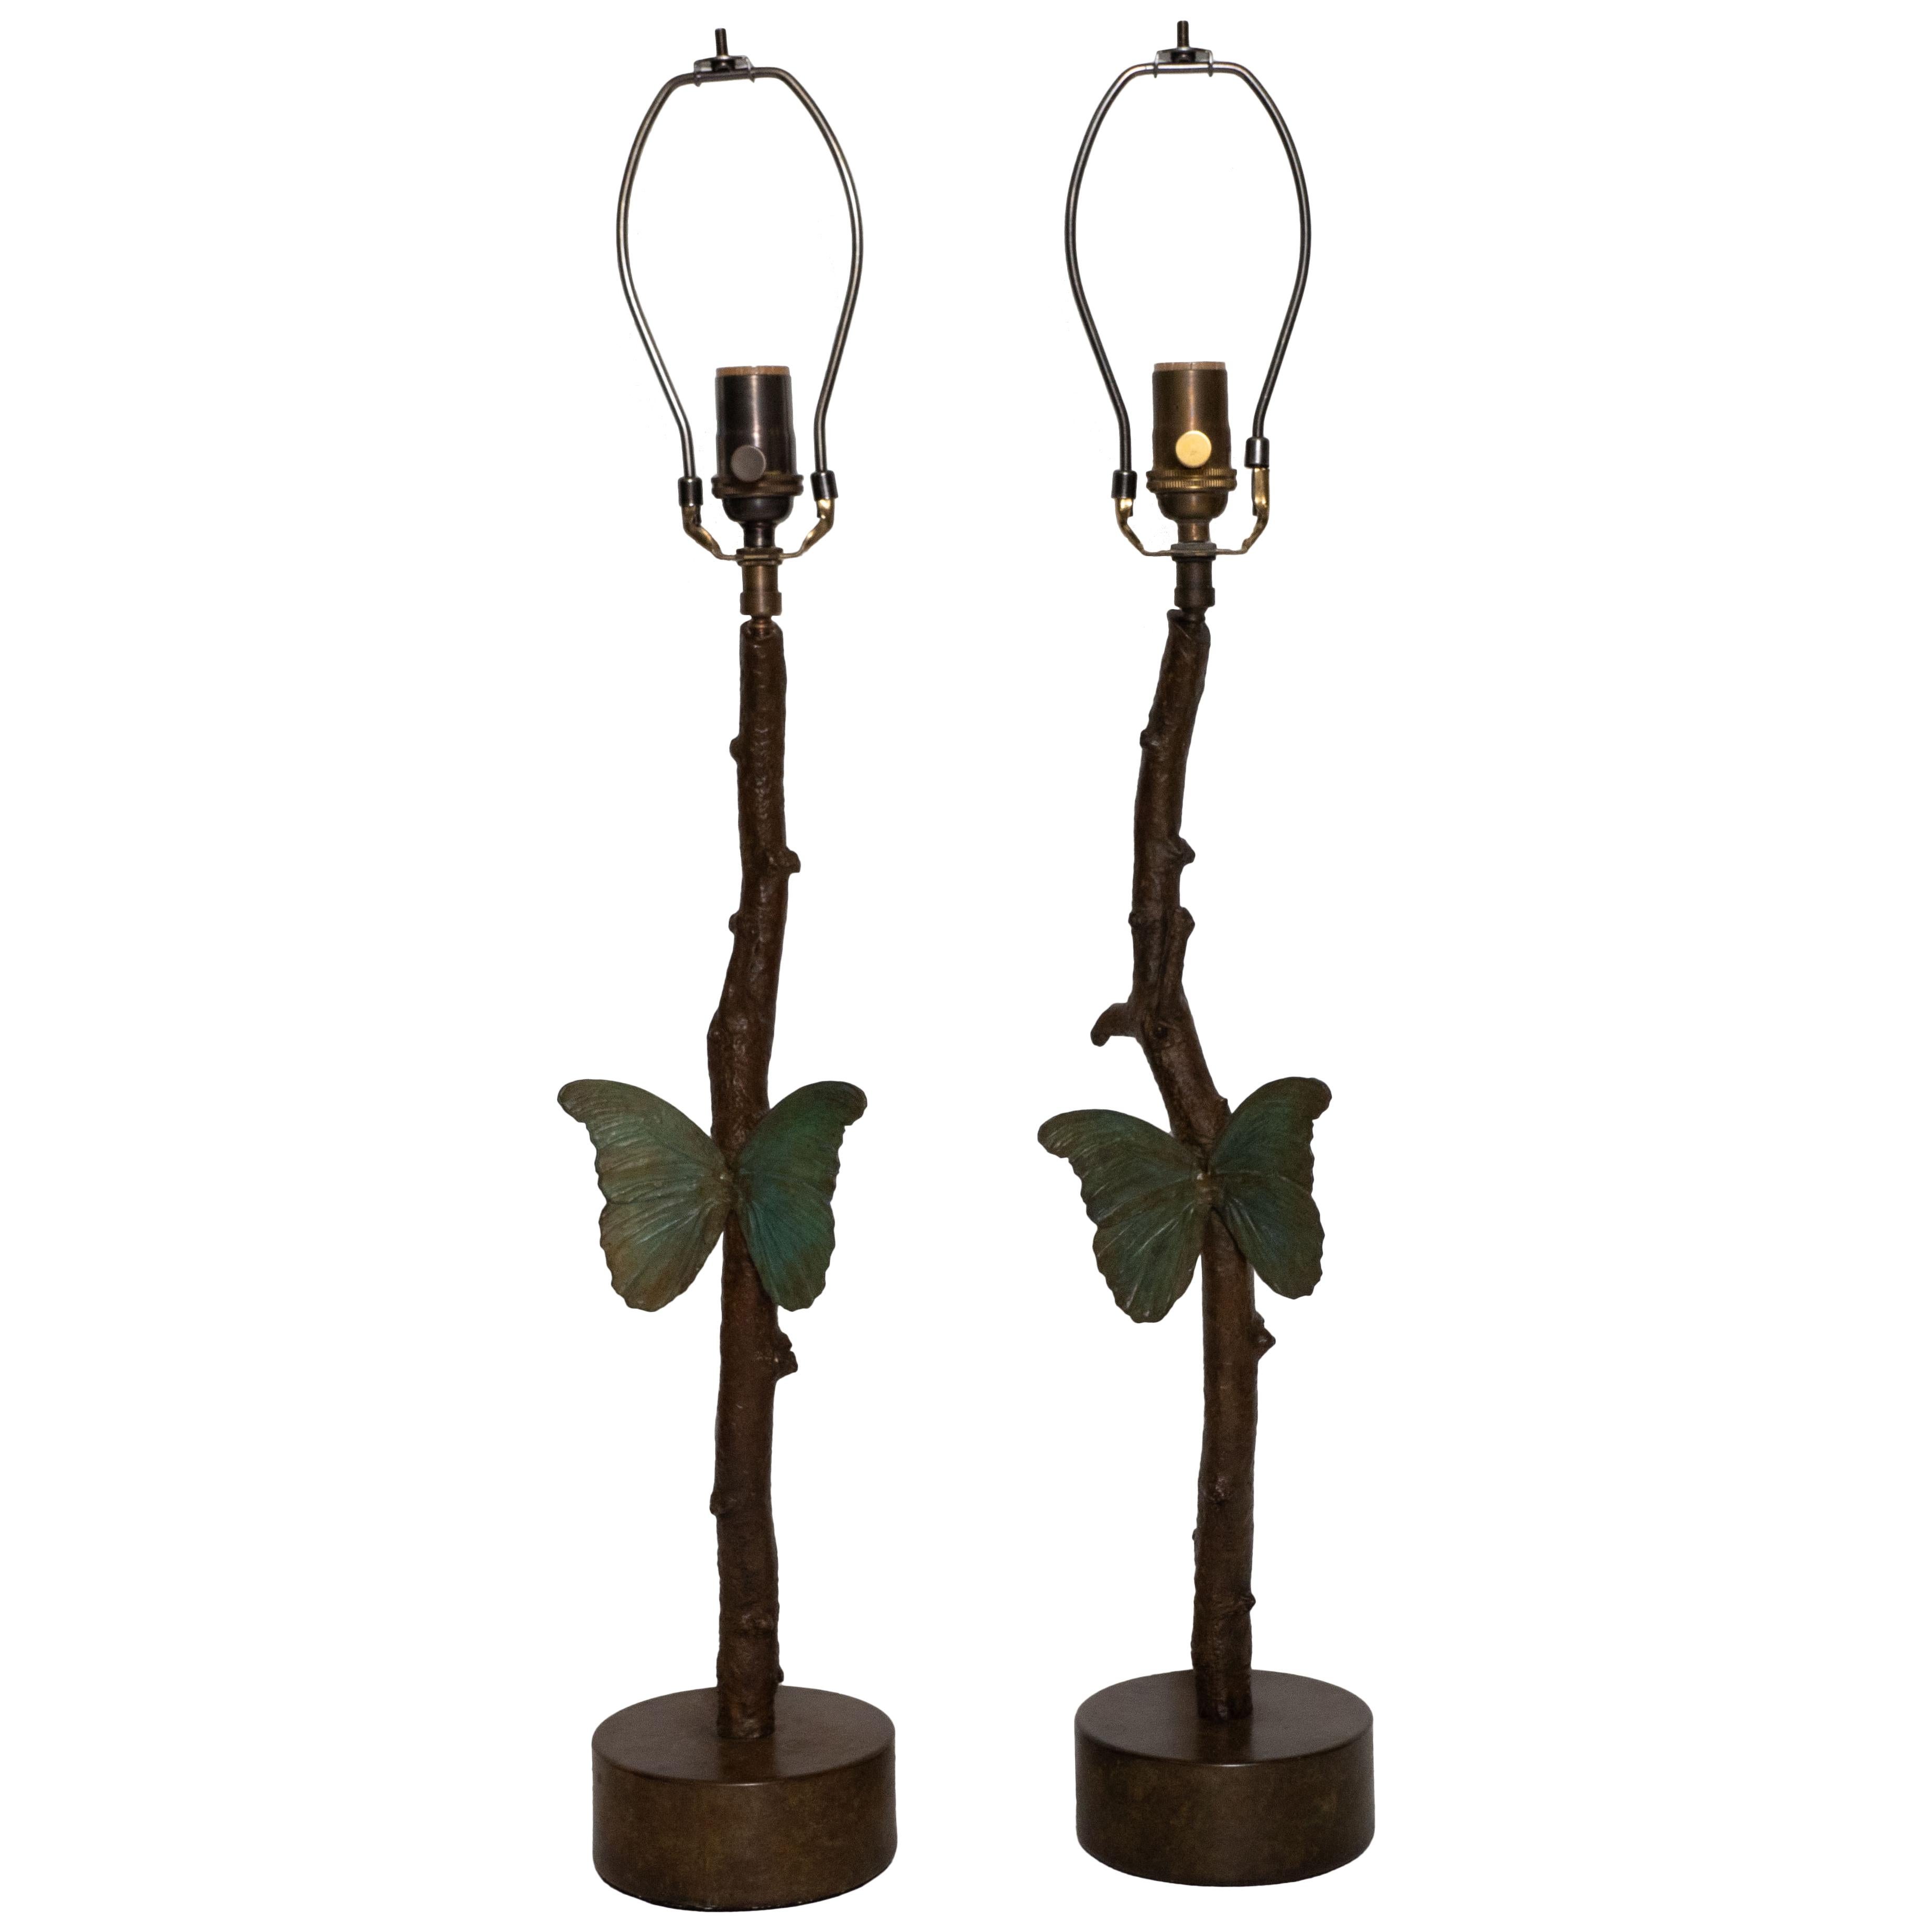 Pair of exquisitely cast bronze lamps depicting a butterfly on a branch.